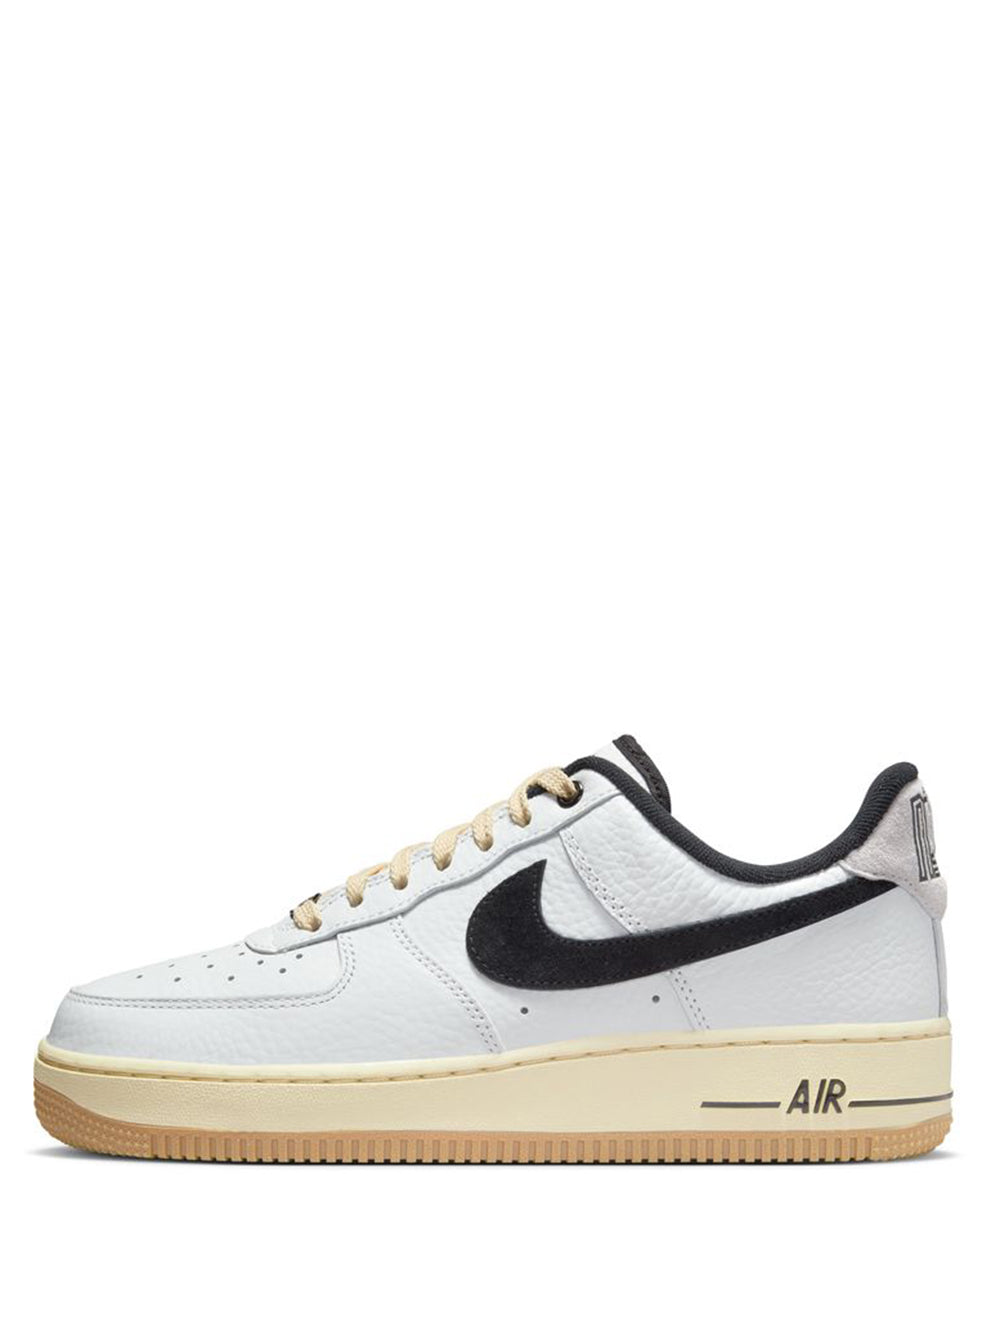 NIKE-Wmns air force 1 `07 lx-DR0148 101